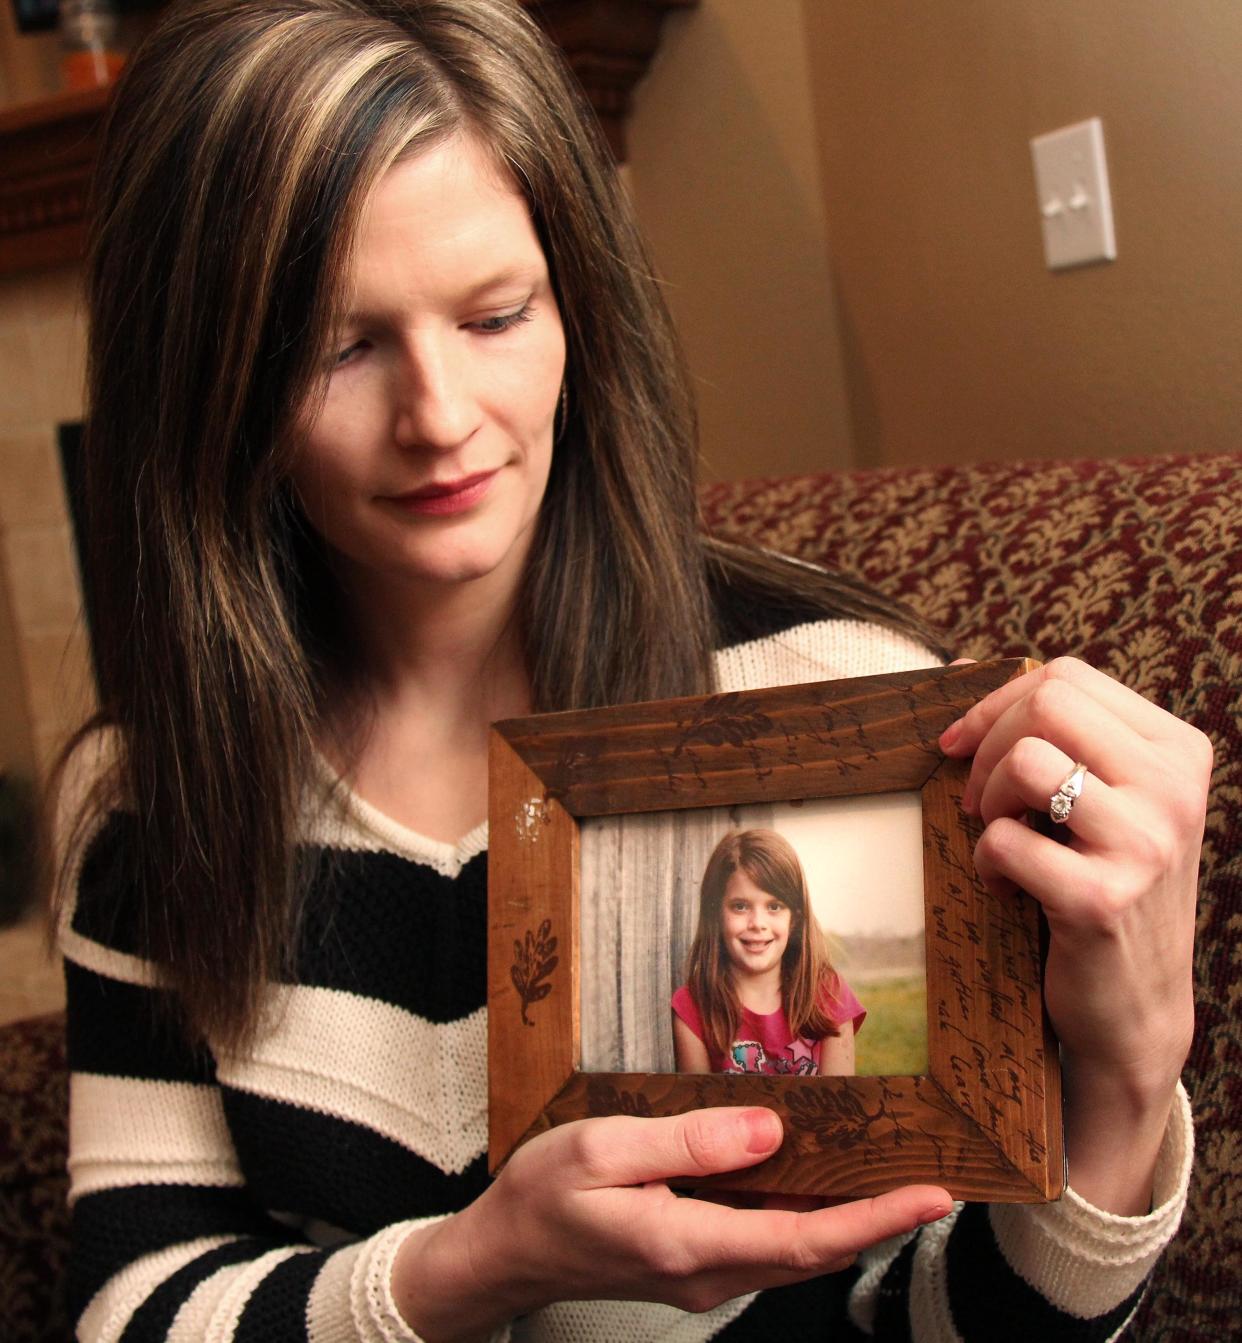 Erin Petersen remembers her niece, Hailey Owens, as a sweet and loving 10-year-old. Petersen said she felt numb thinking about how Hailey was killed.